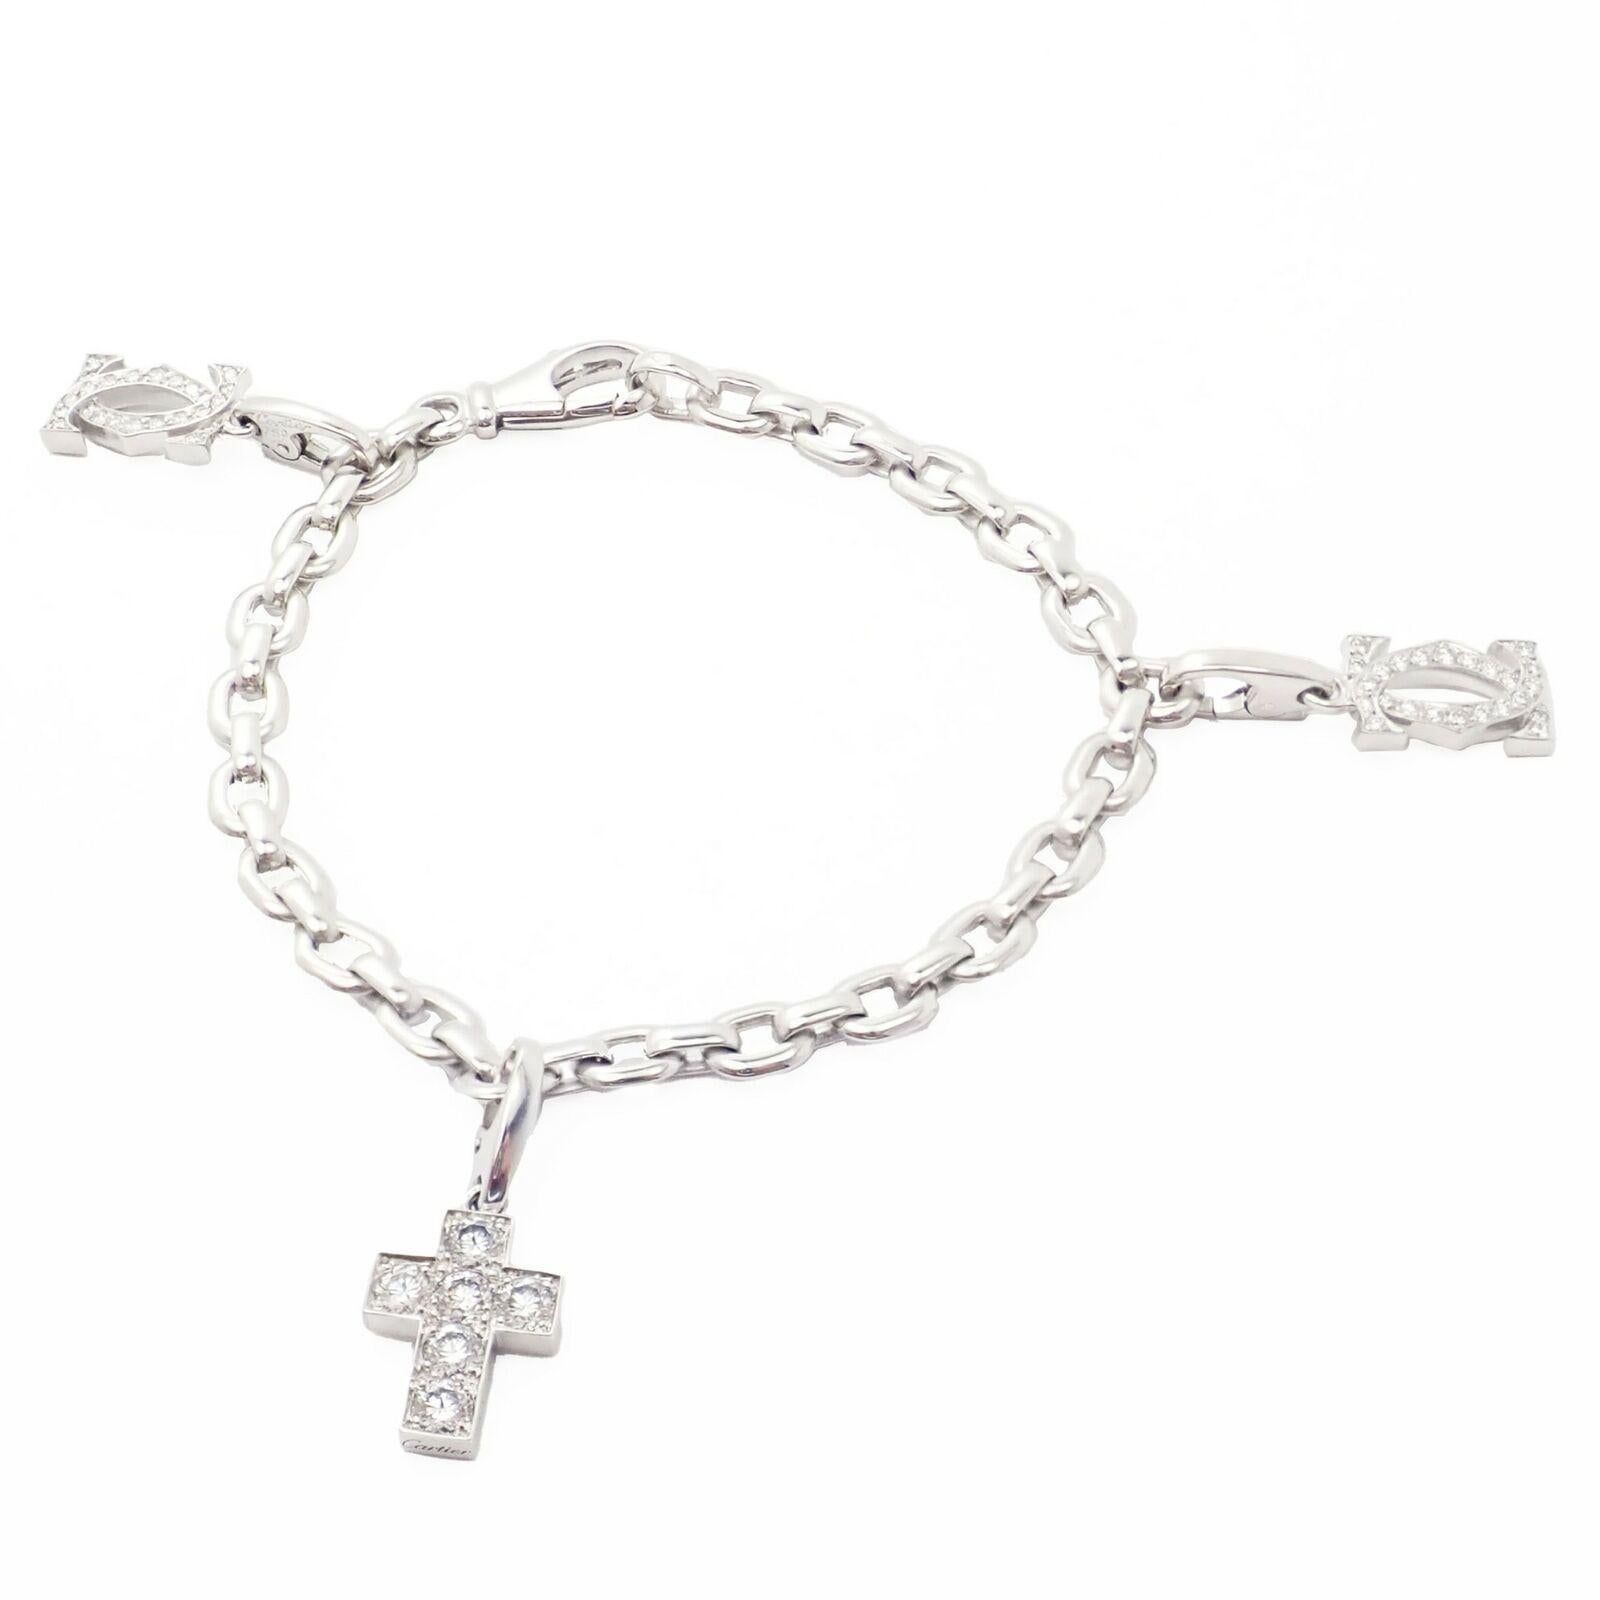 18k White Gold Diamond Three Charms Diamond Cross and two Double C Penelope Link Bracelet by Cartier.
With Round Brilliant Cut Diamonds Double C charms: 0.21ctw VVS Clarity/F Color (each)
Cross Charm: 6 Diamonds - 0.84ctw VVS Clarity/F Color
Each